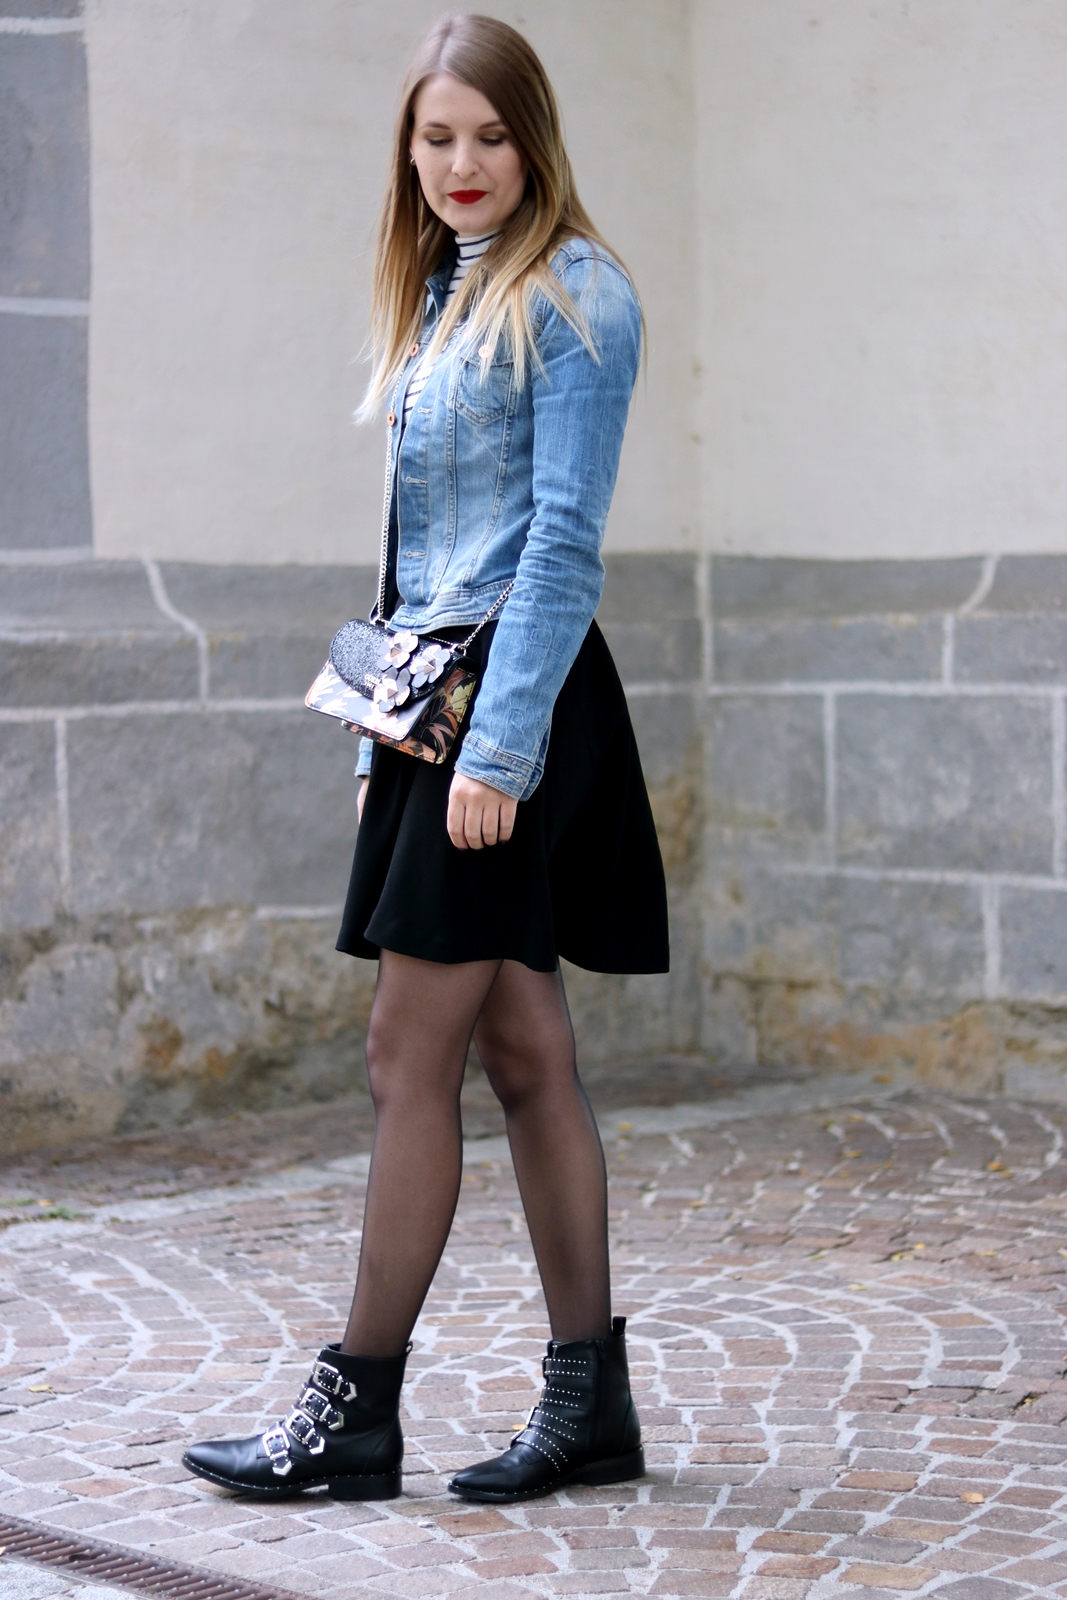 Timeless fashion classic # 1 The denim jacket - Fashionmylegs : The tights  and hosiery blog